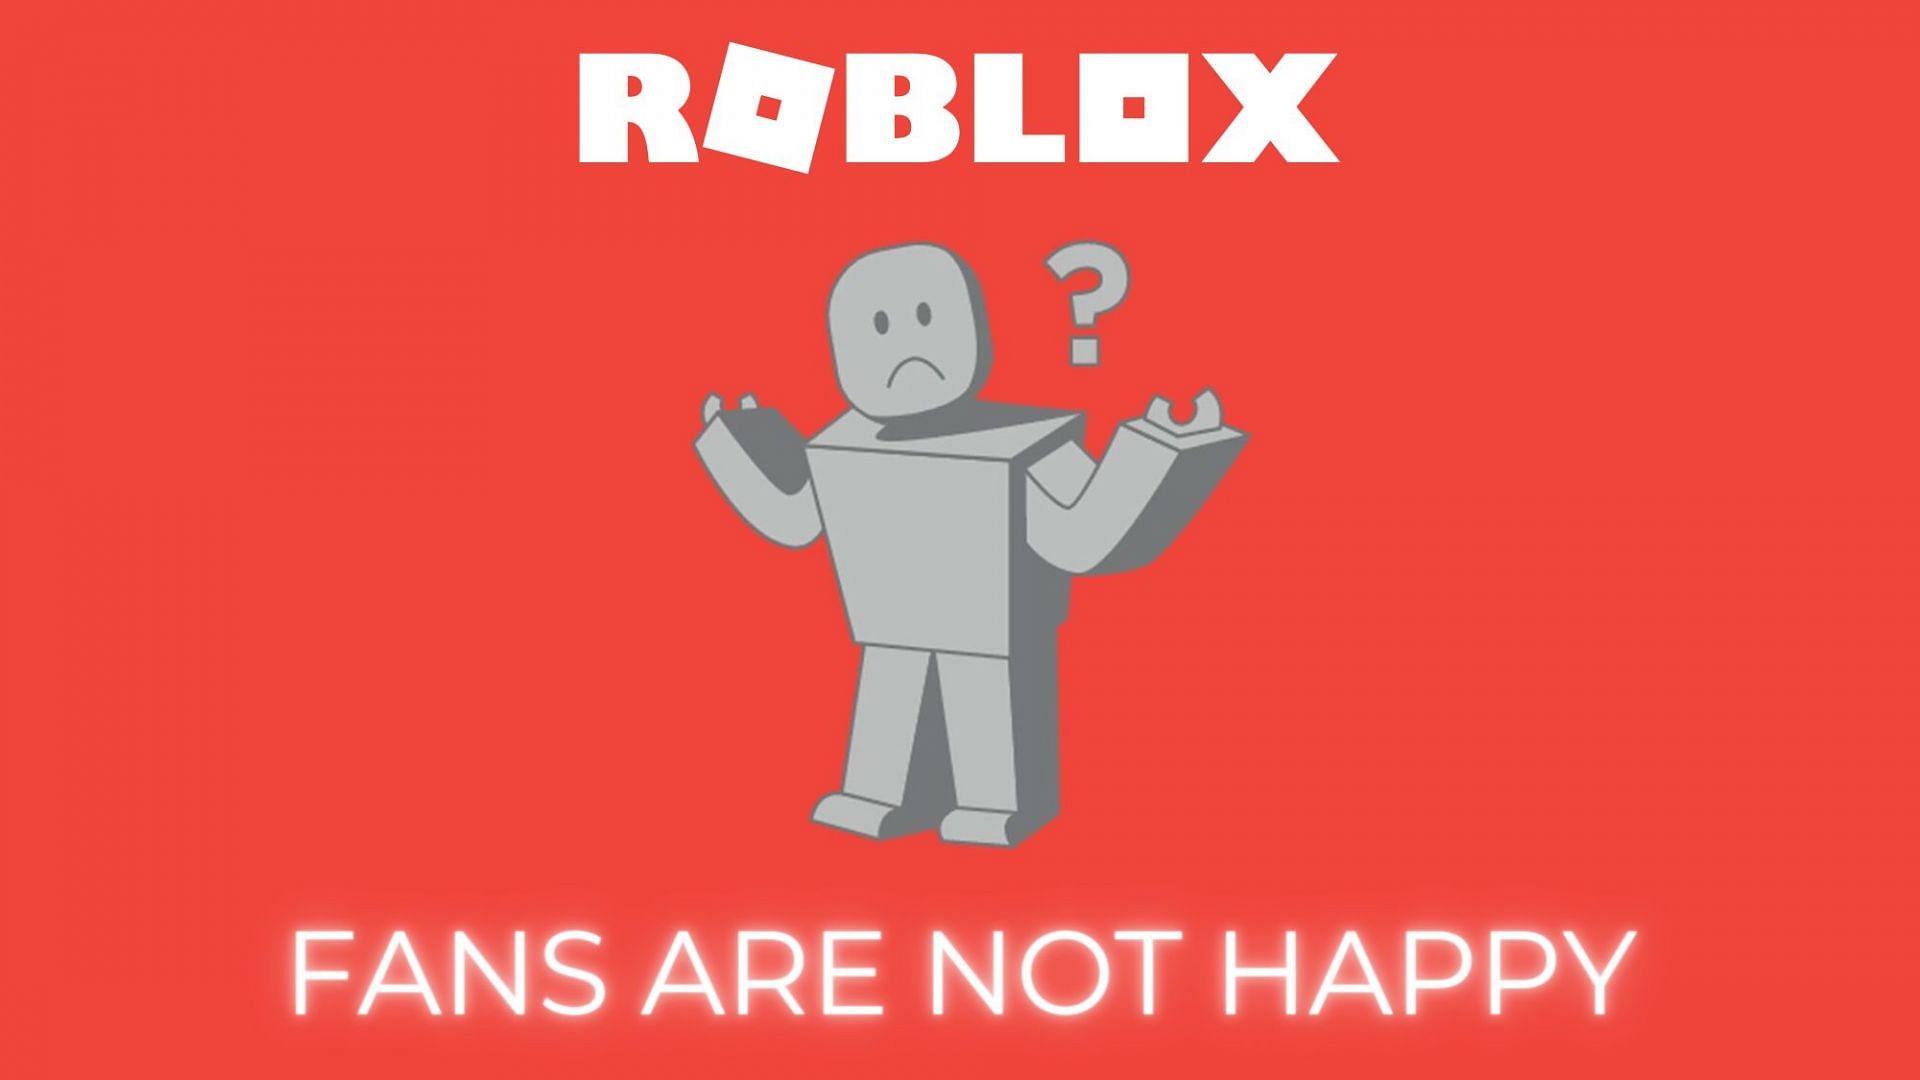 I feel paranoid that Roblox may never come back”: Fans distressed over long  downtime, expect it to be longer than 3 days